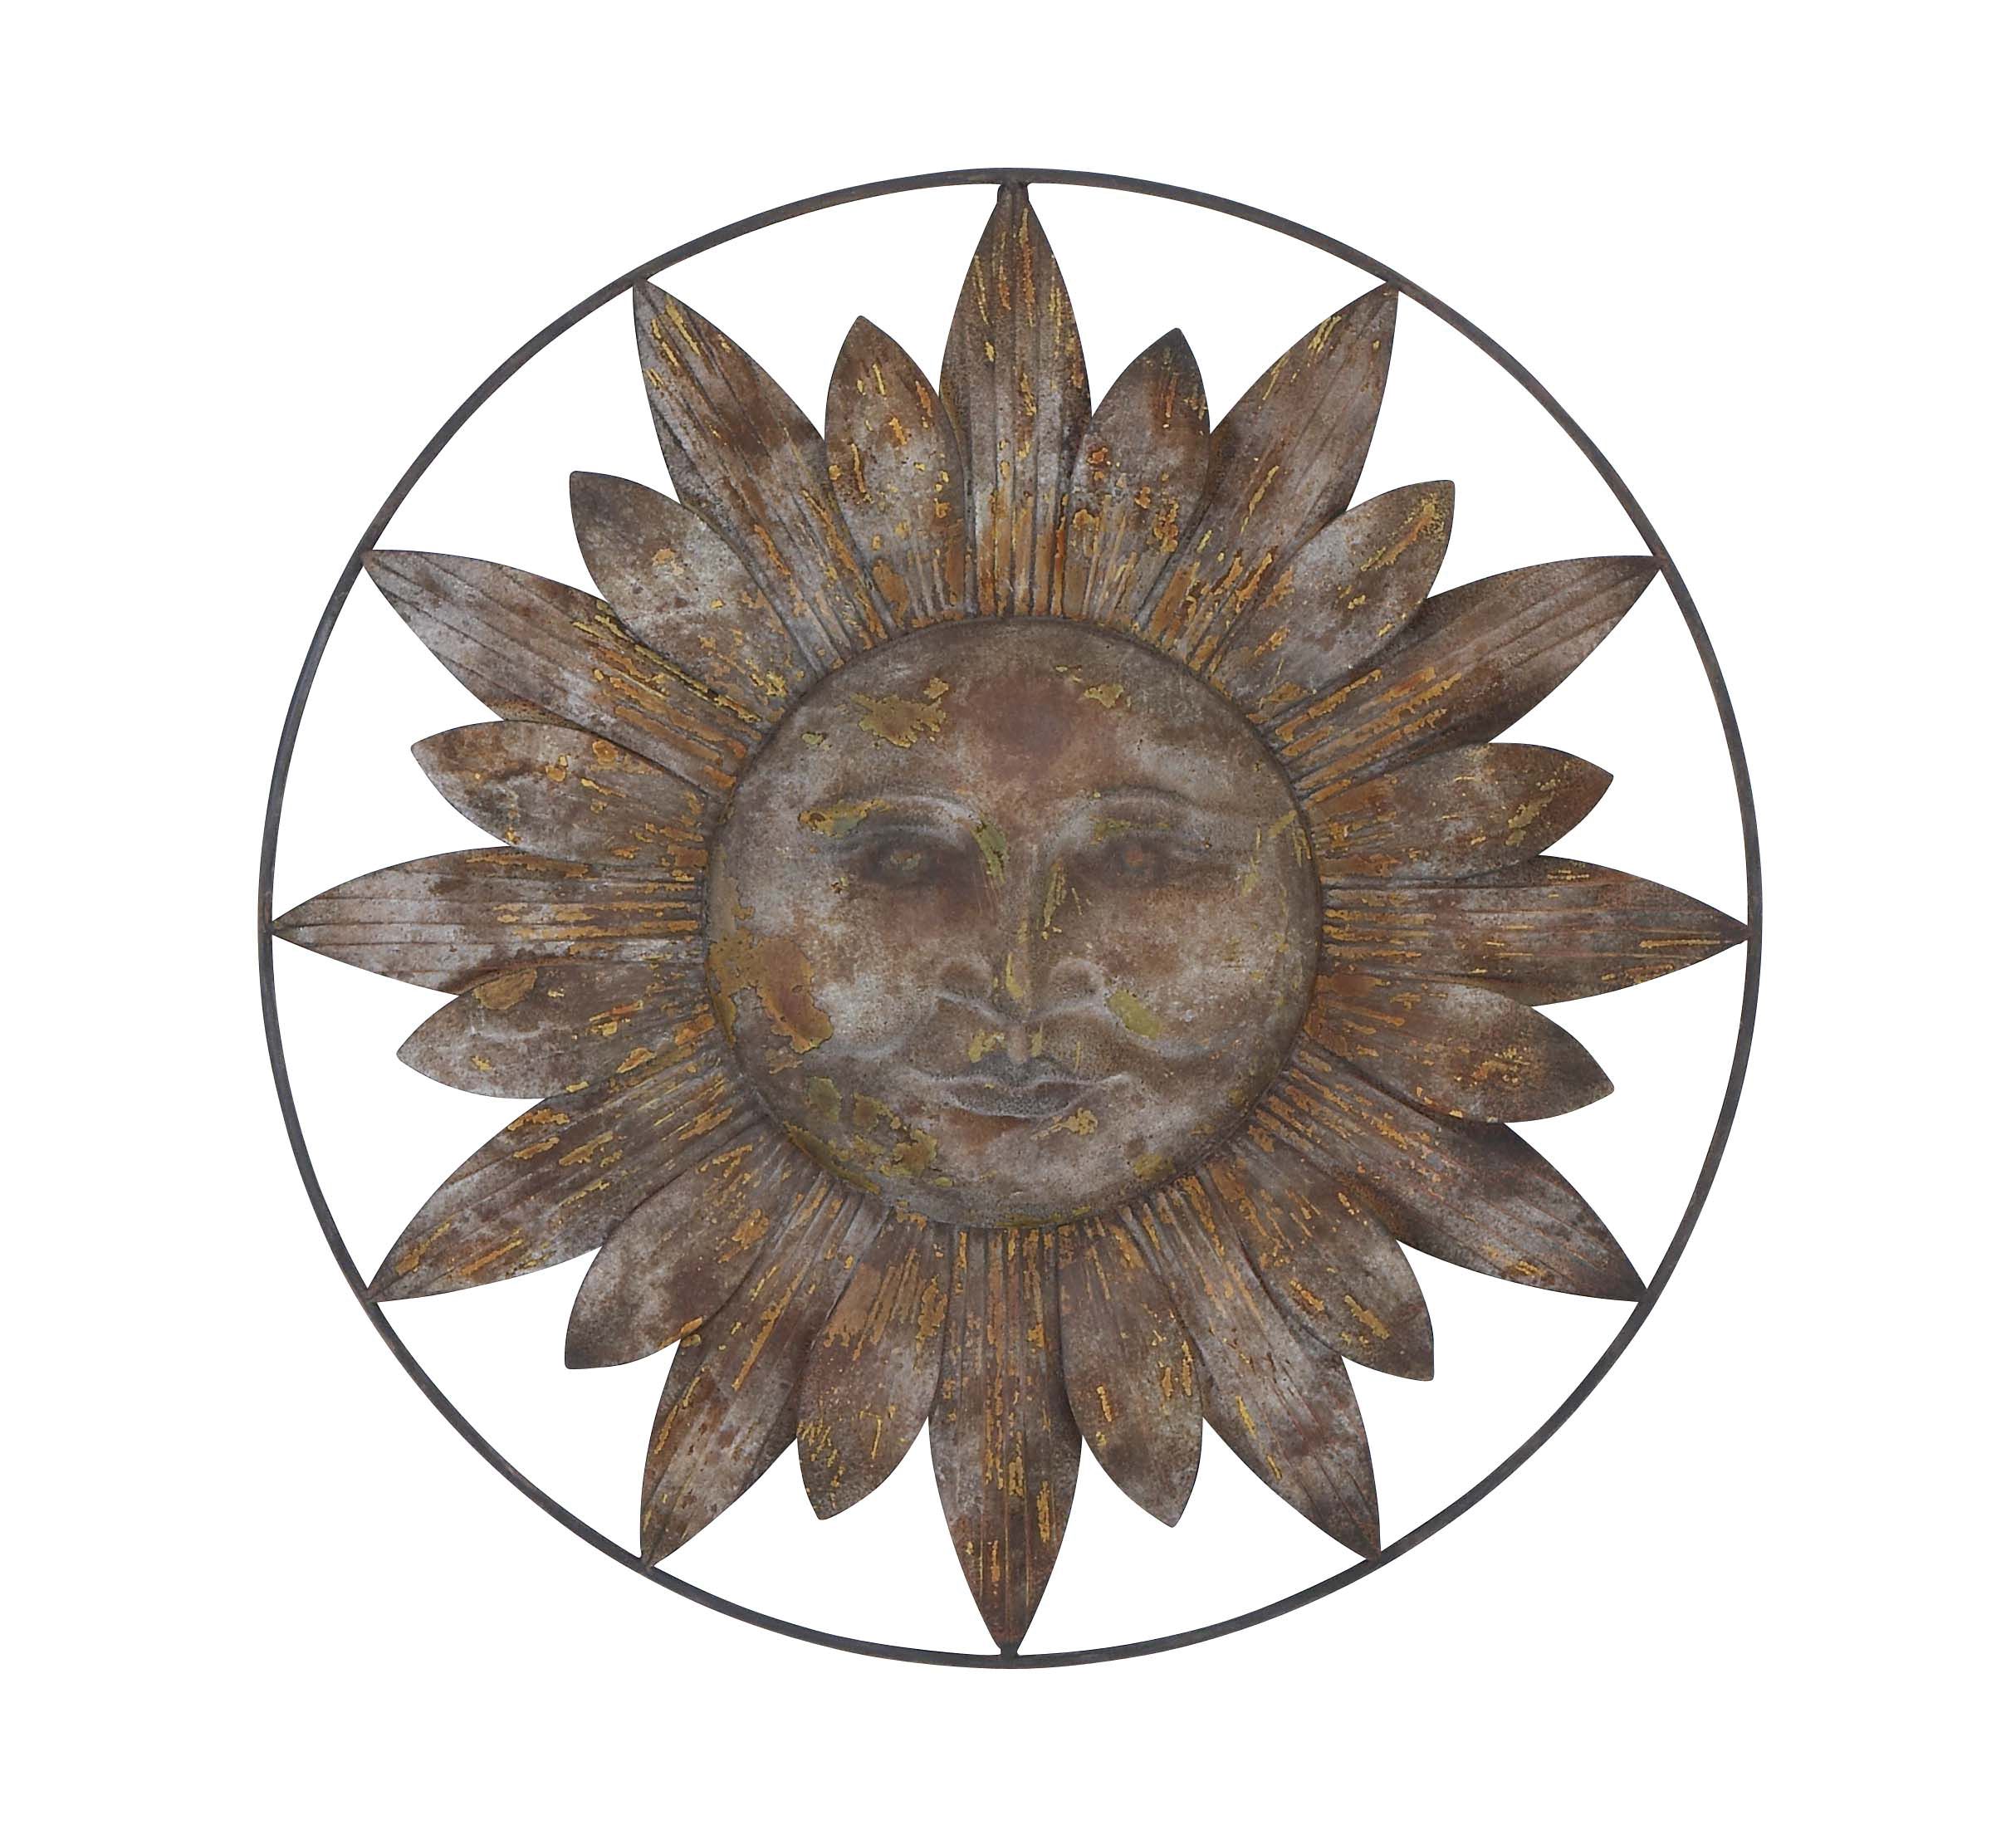 Decmode – Large Black & Bronze Metal Sun Garden Decor, Hanging Outdoor Intended For Most Up To Date Large Wall Decor Ornaments (View 17 of 20)